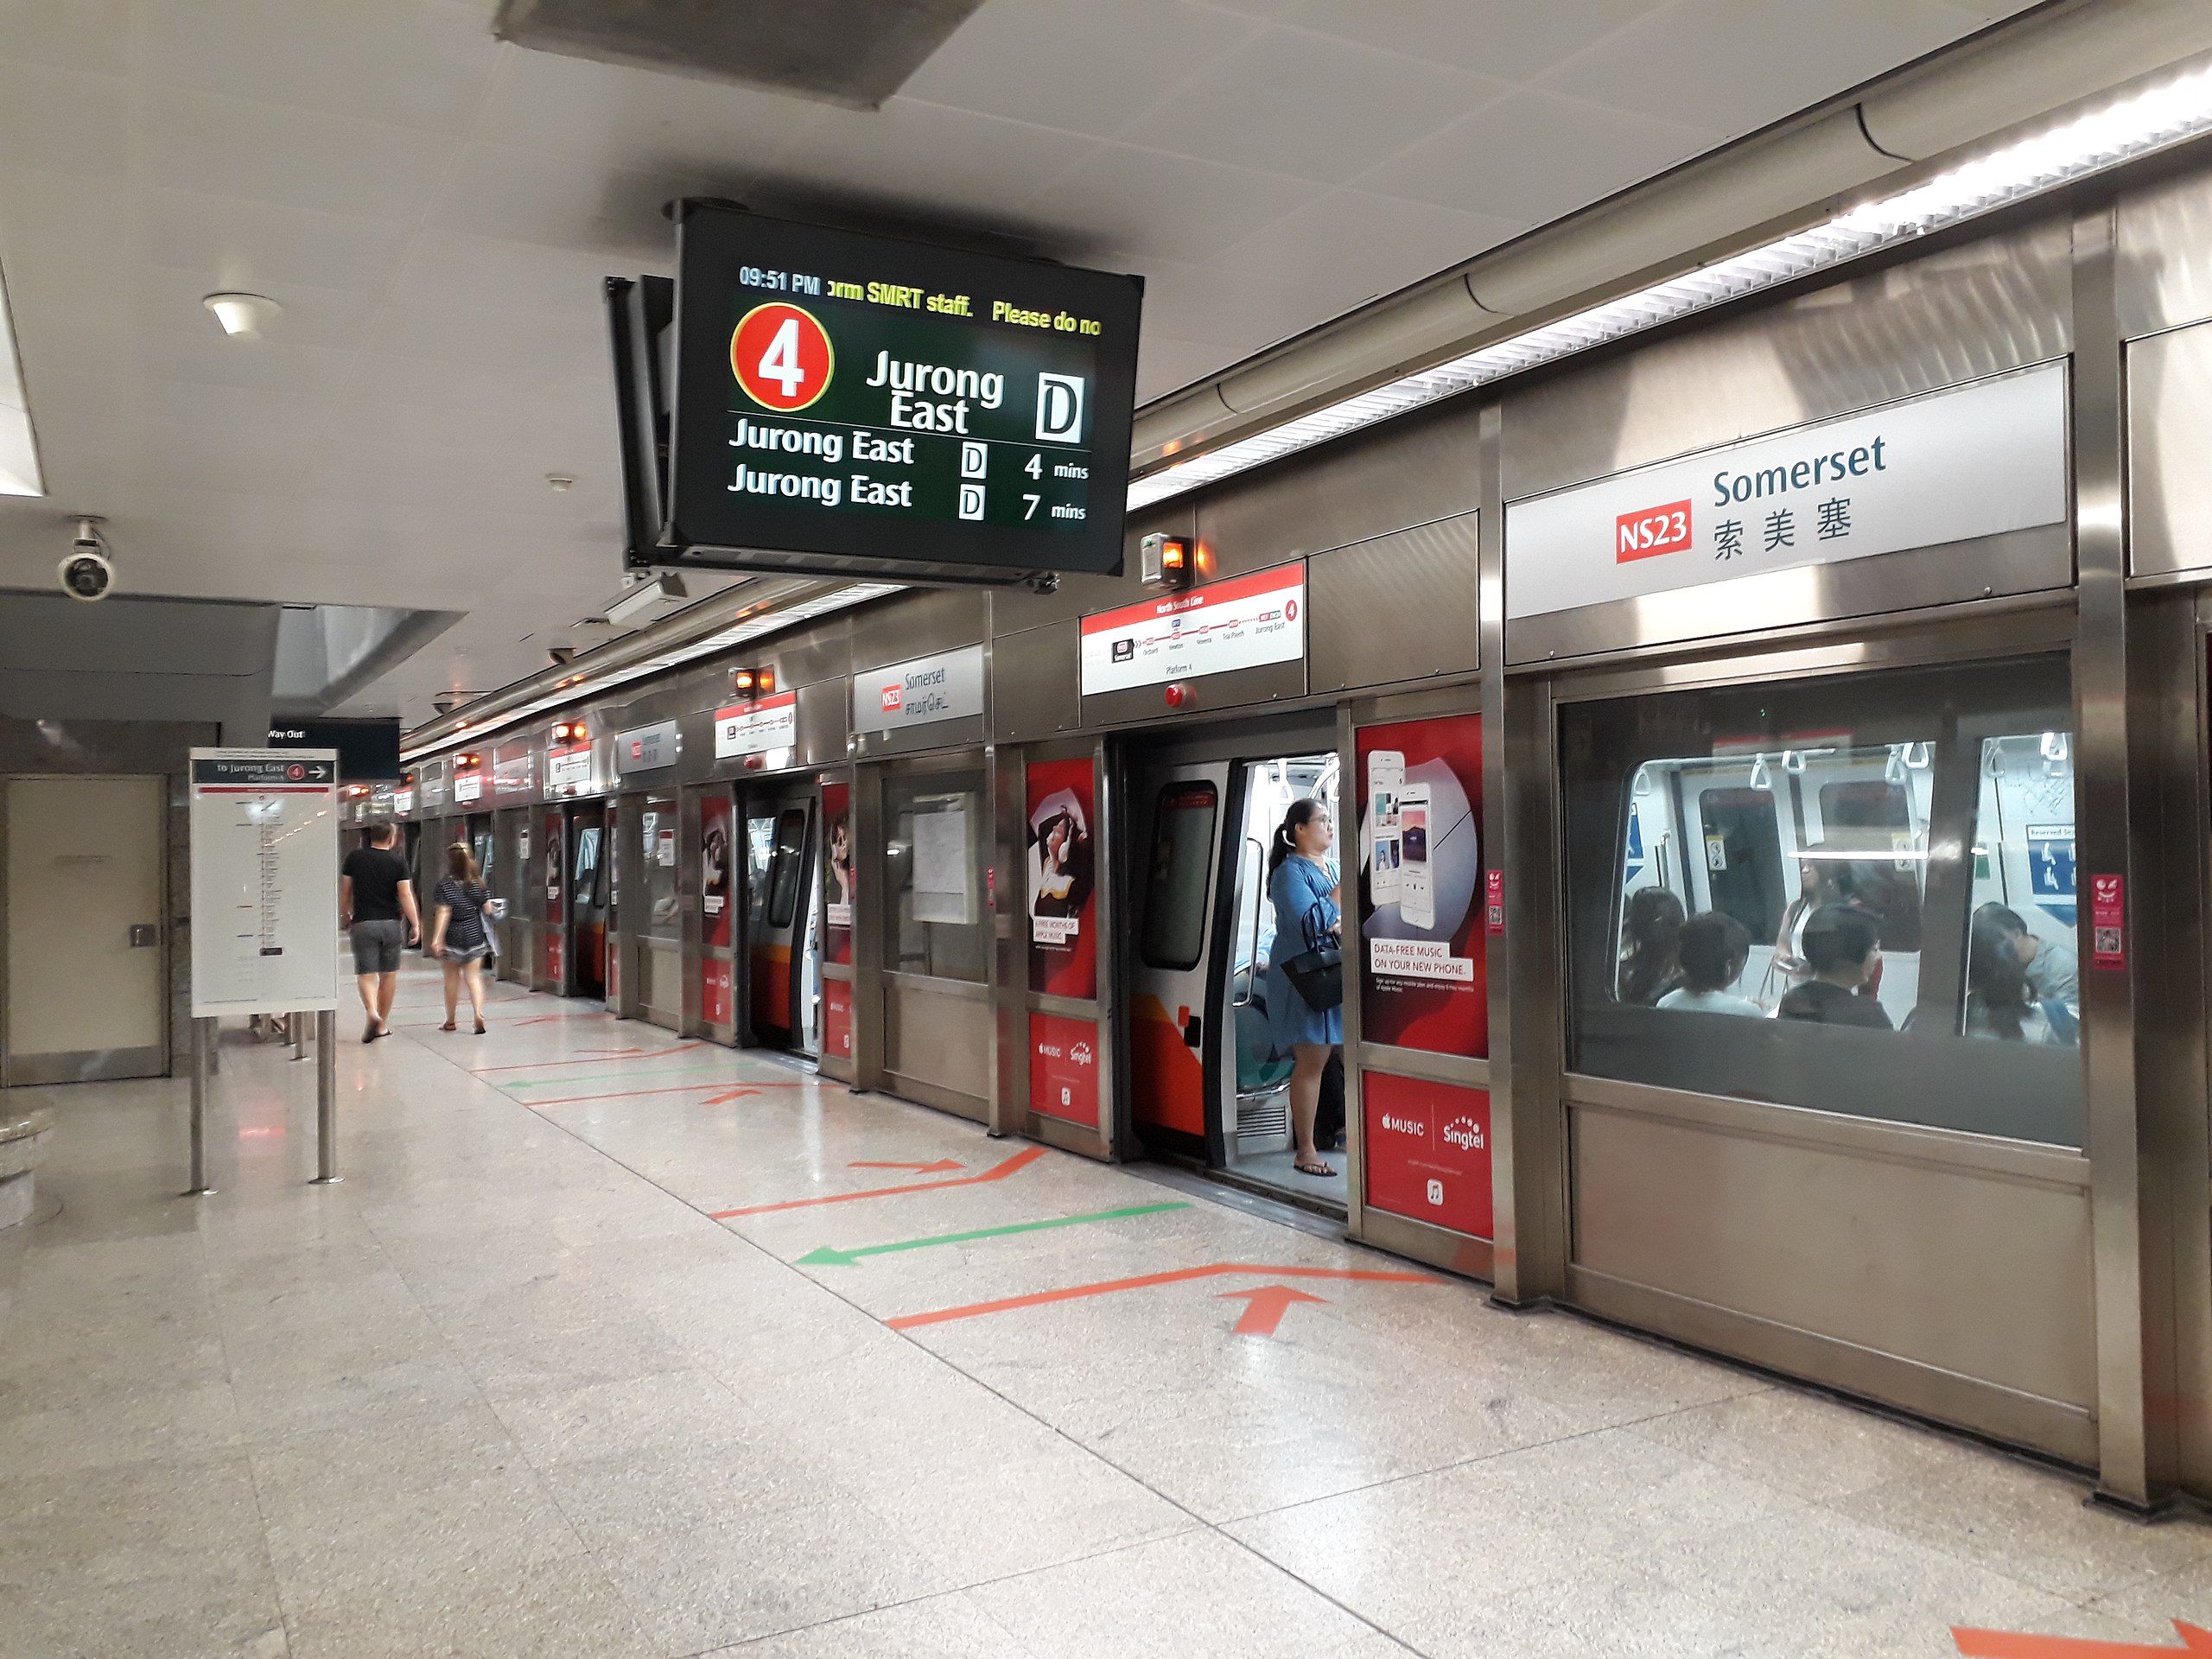 NS23 Somerset MRT Station Singapore MRT North South Red line